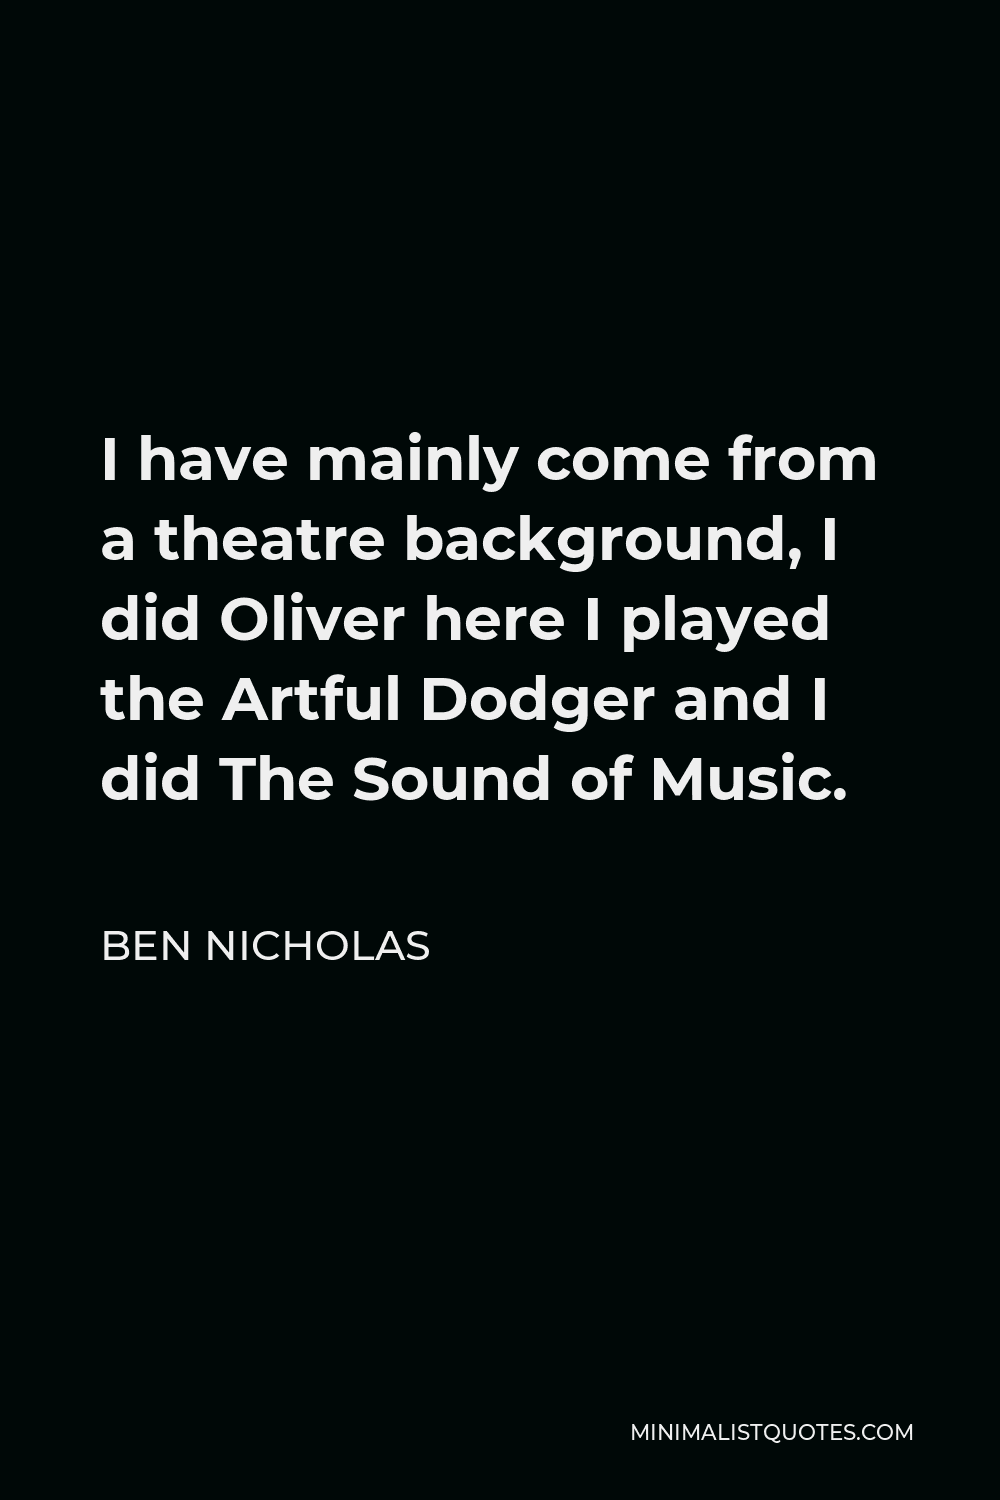 Ben Nicholas Quote - I have mainly come from a theatre background, I did Oliver here I played the Artful Dodger and I did The Sound of Music.